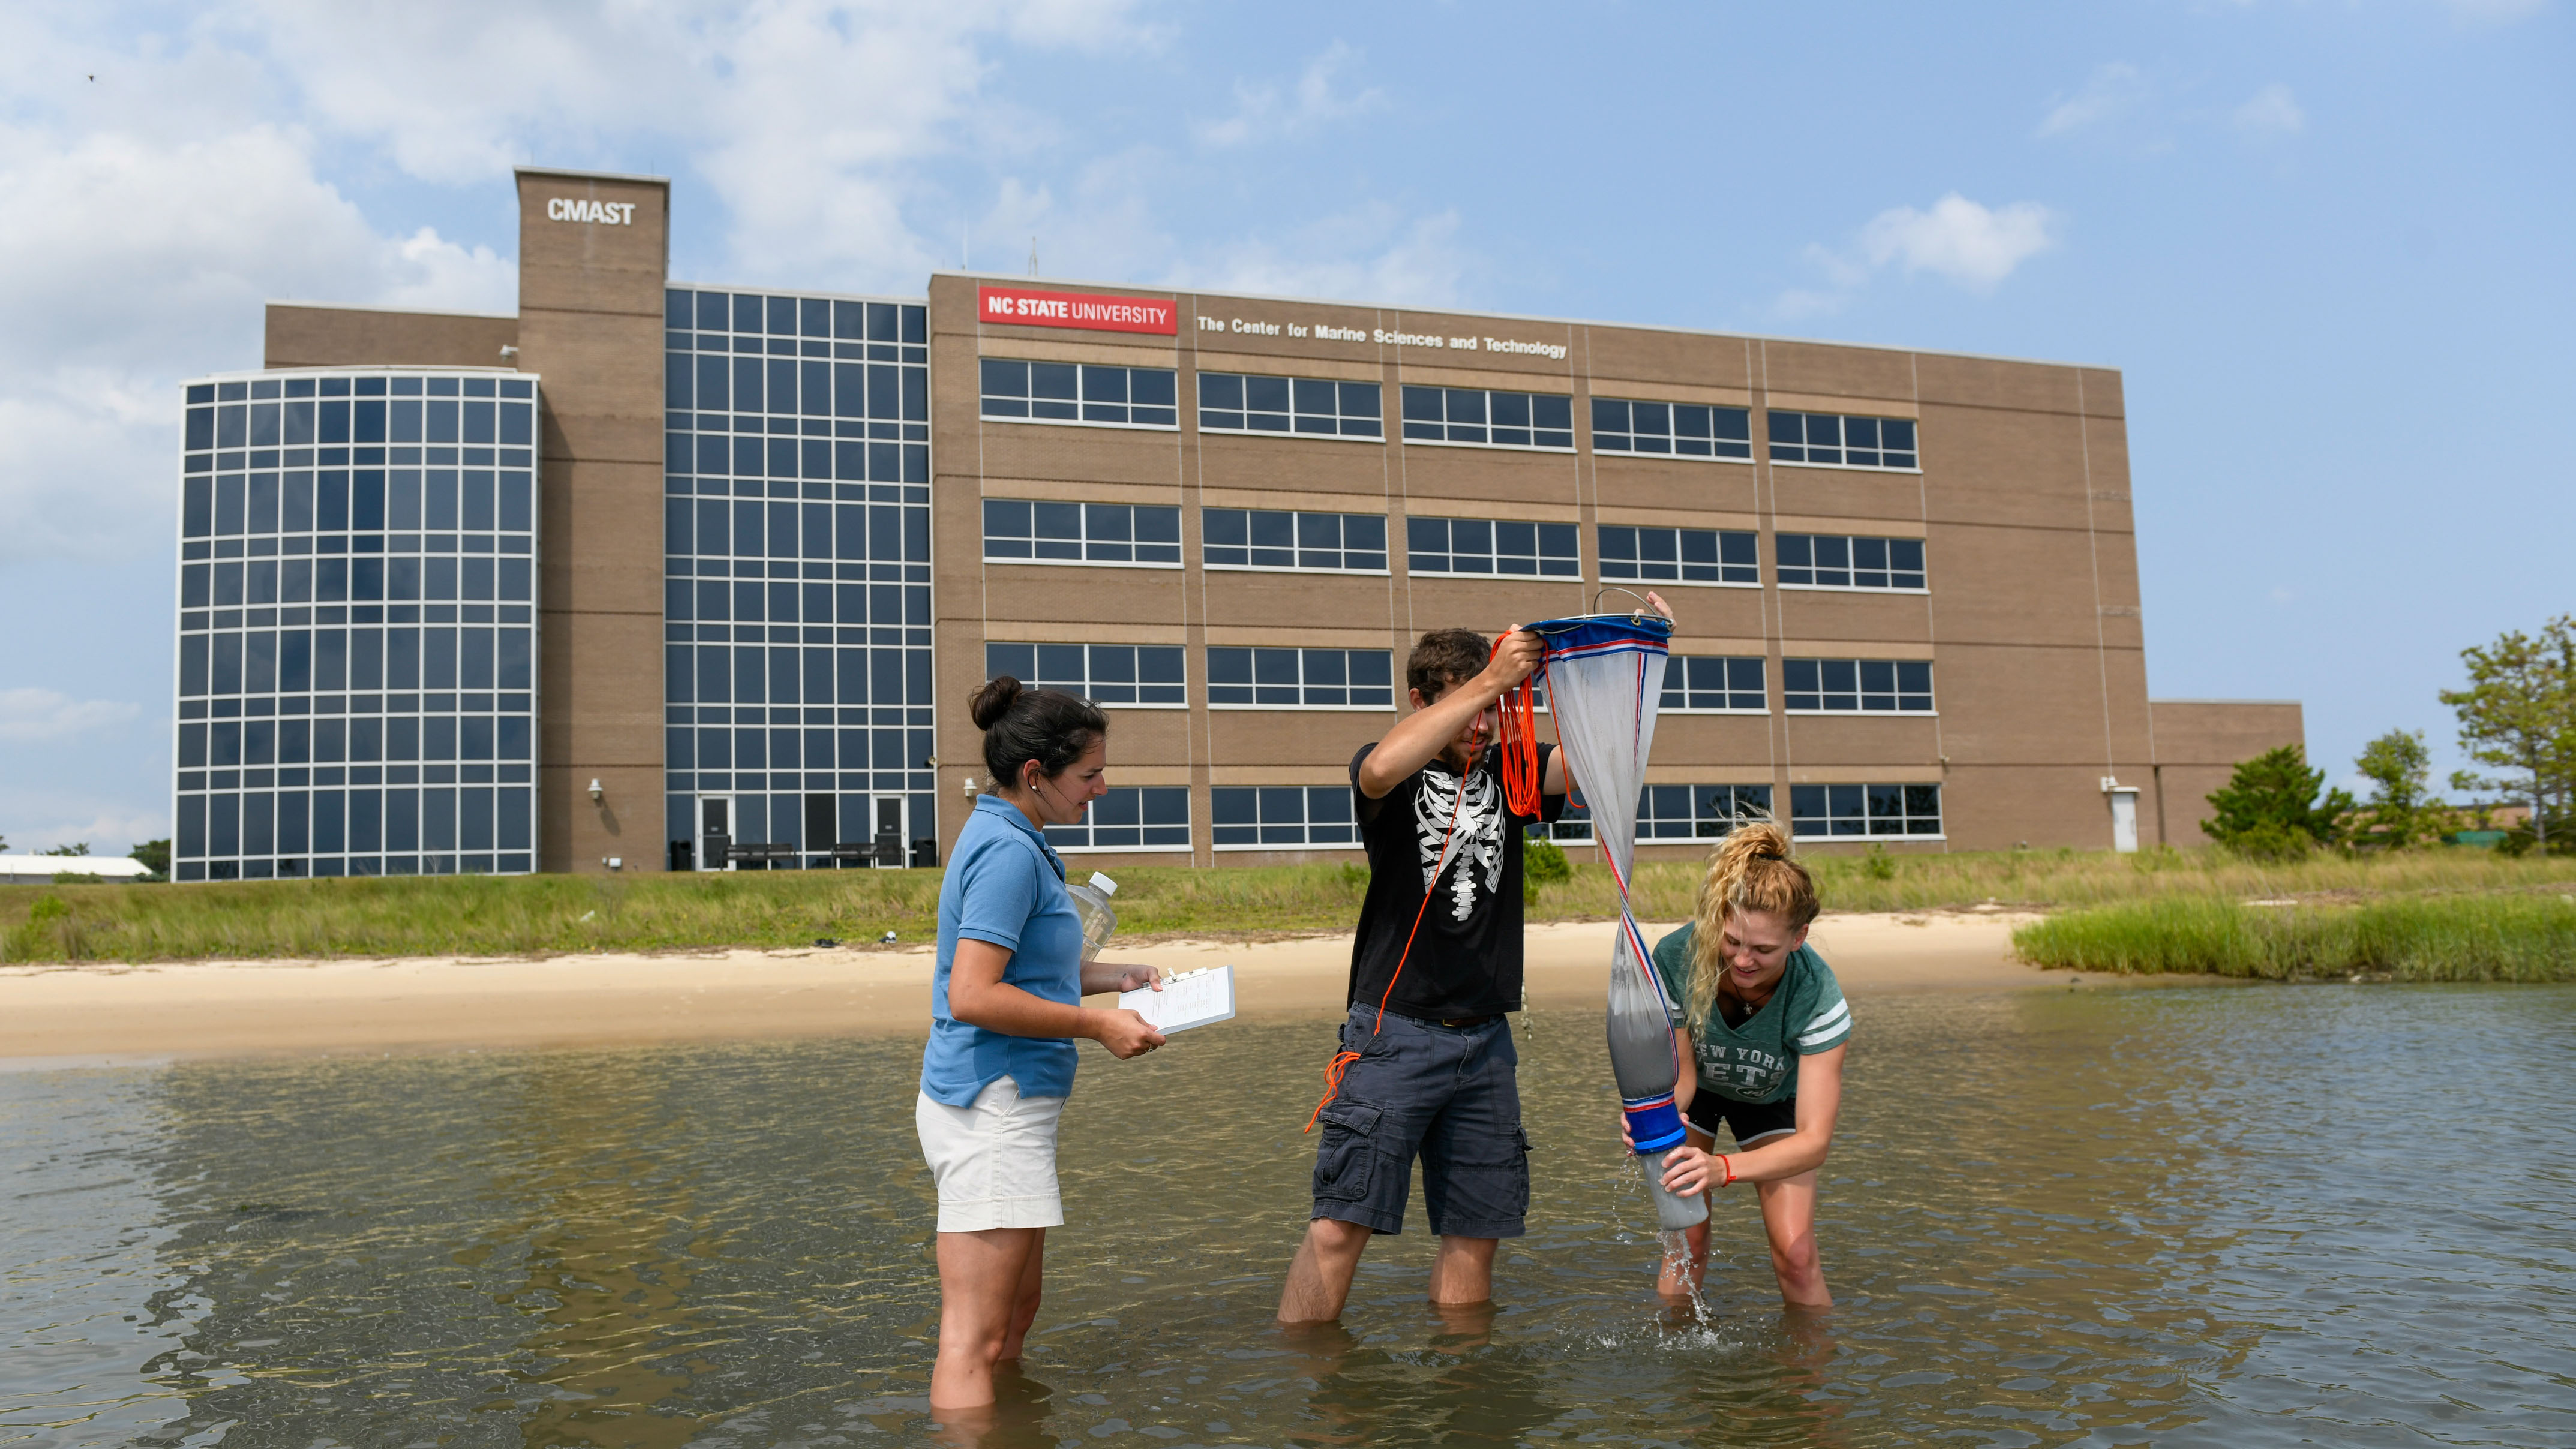 Students gather samples in the sound in front of the CMAST building